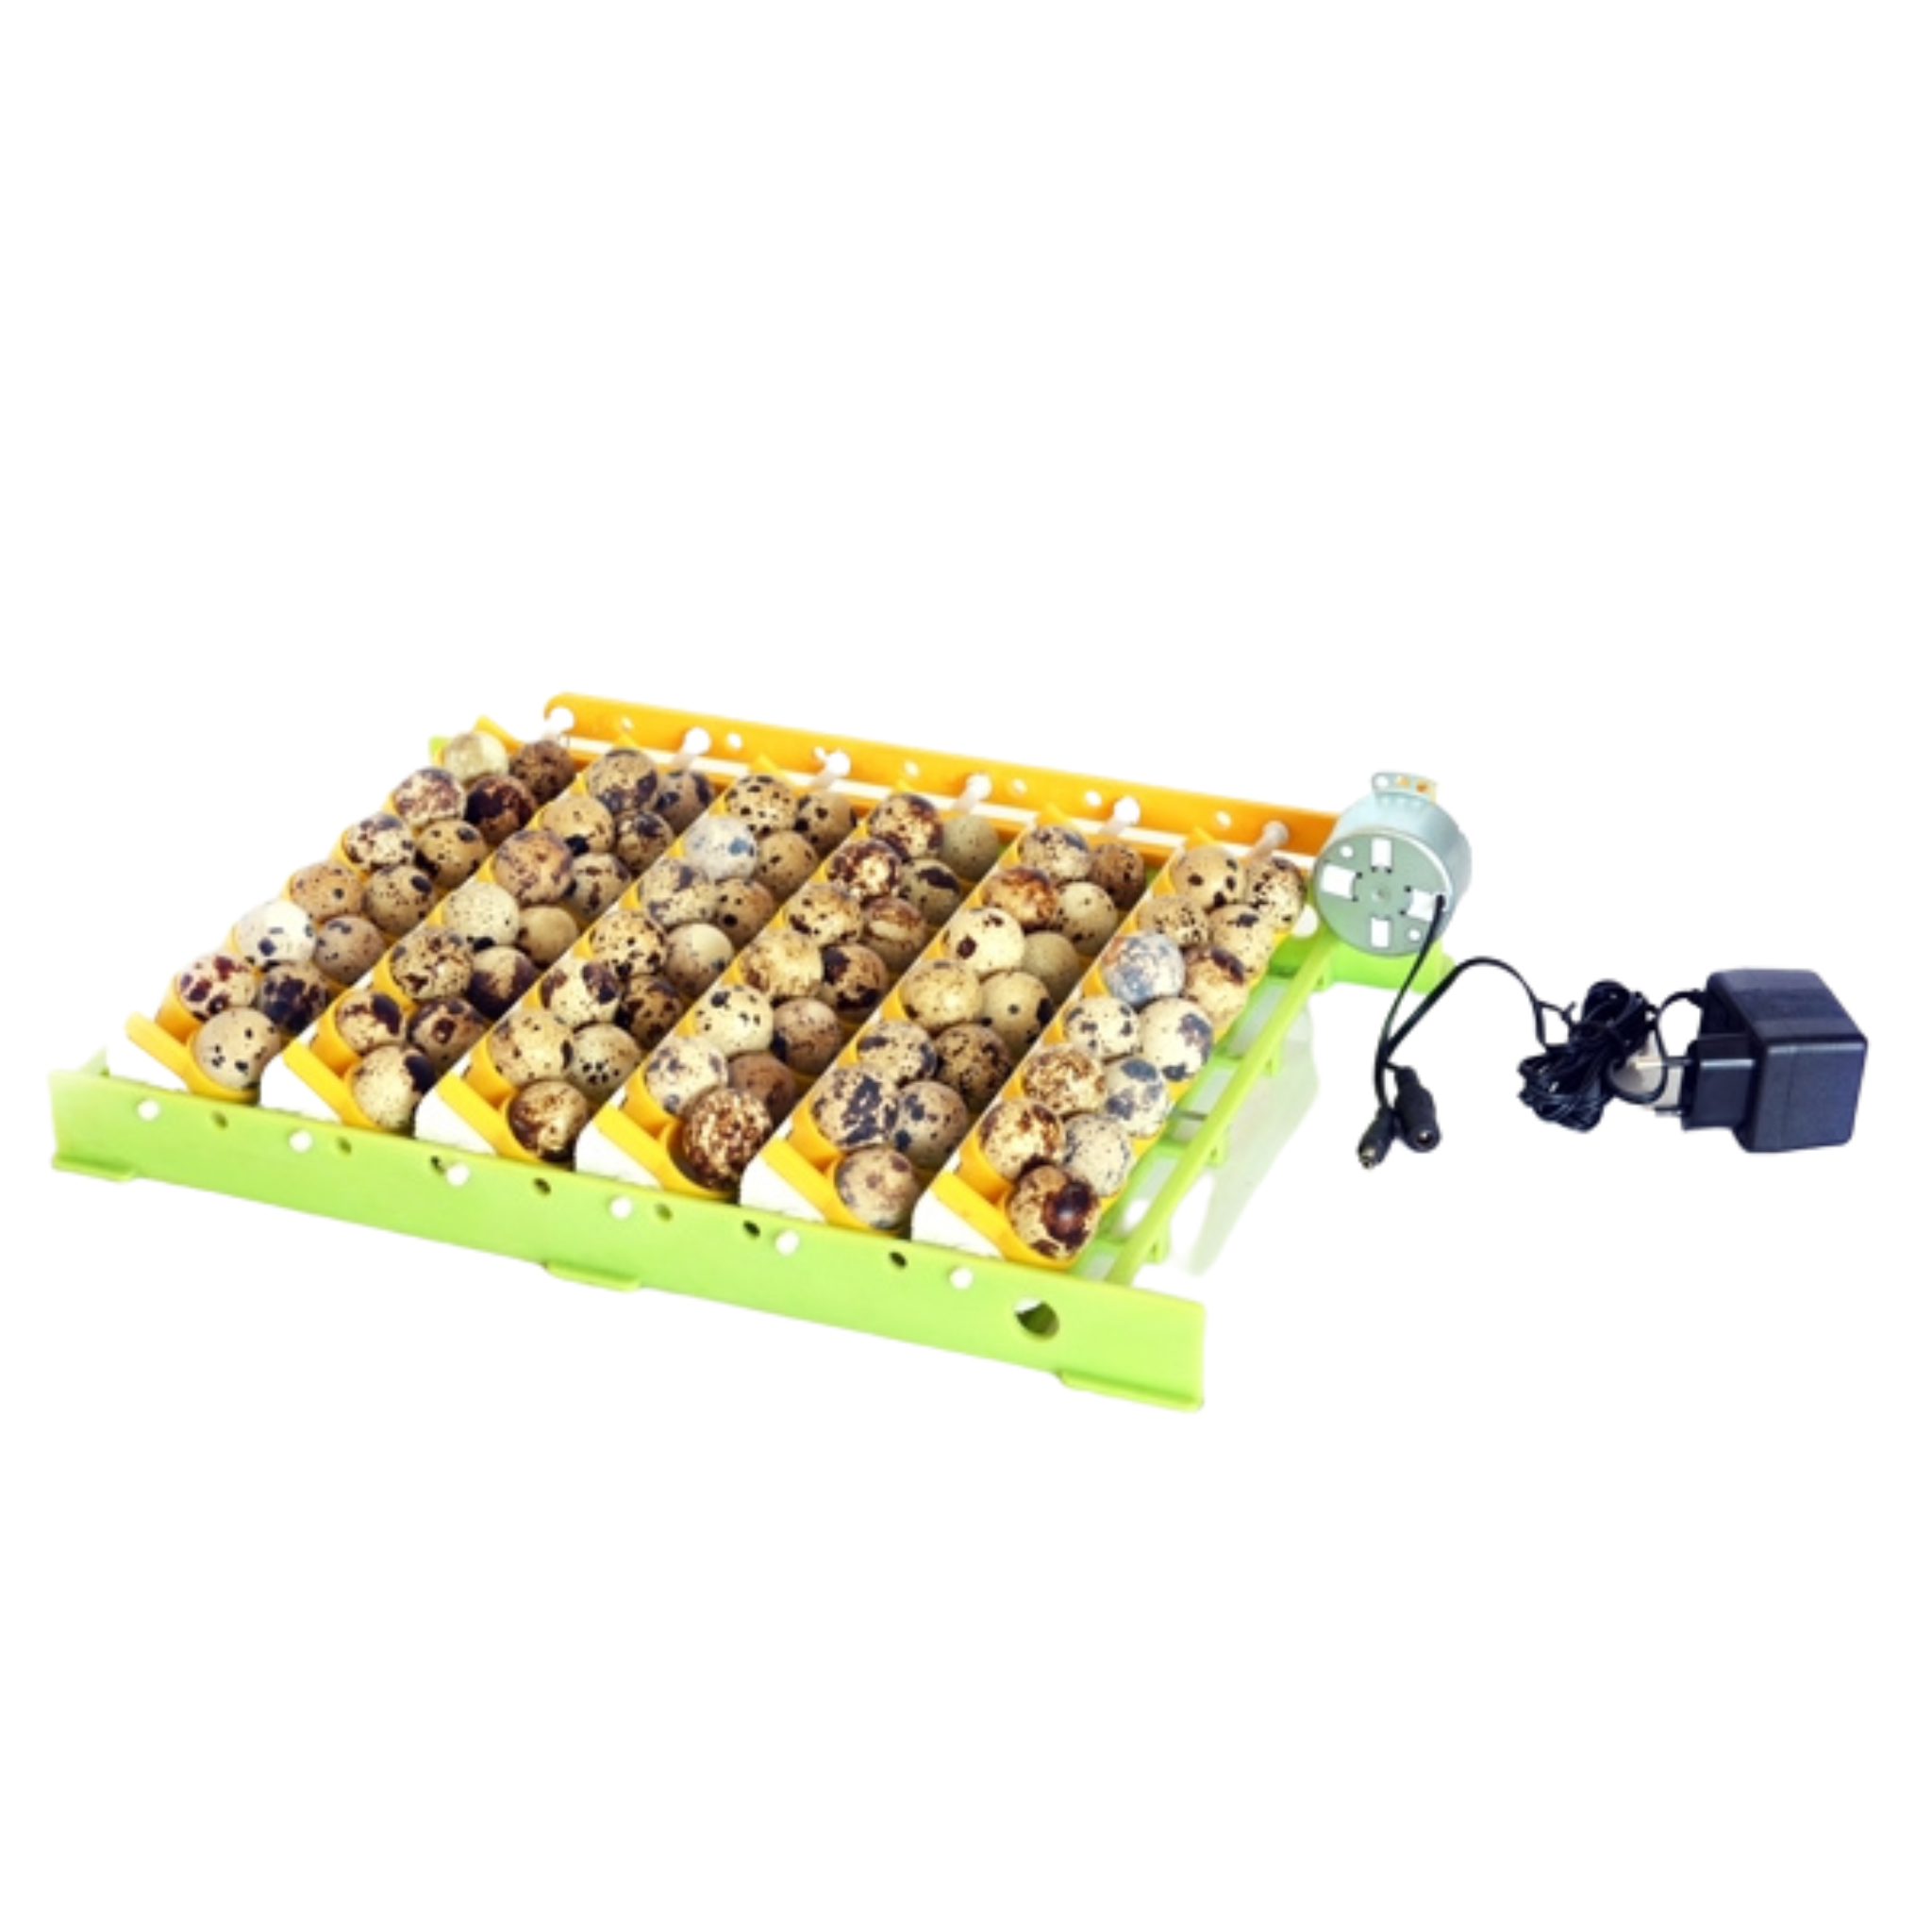 Hatching Time Cimuka. quail egg rack can be seen in image being used with full quail eggs. Conturn motor, and power supply can be seen in image.